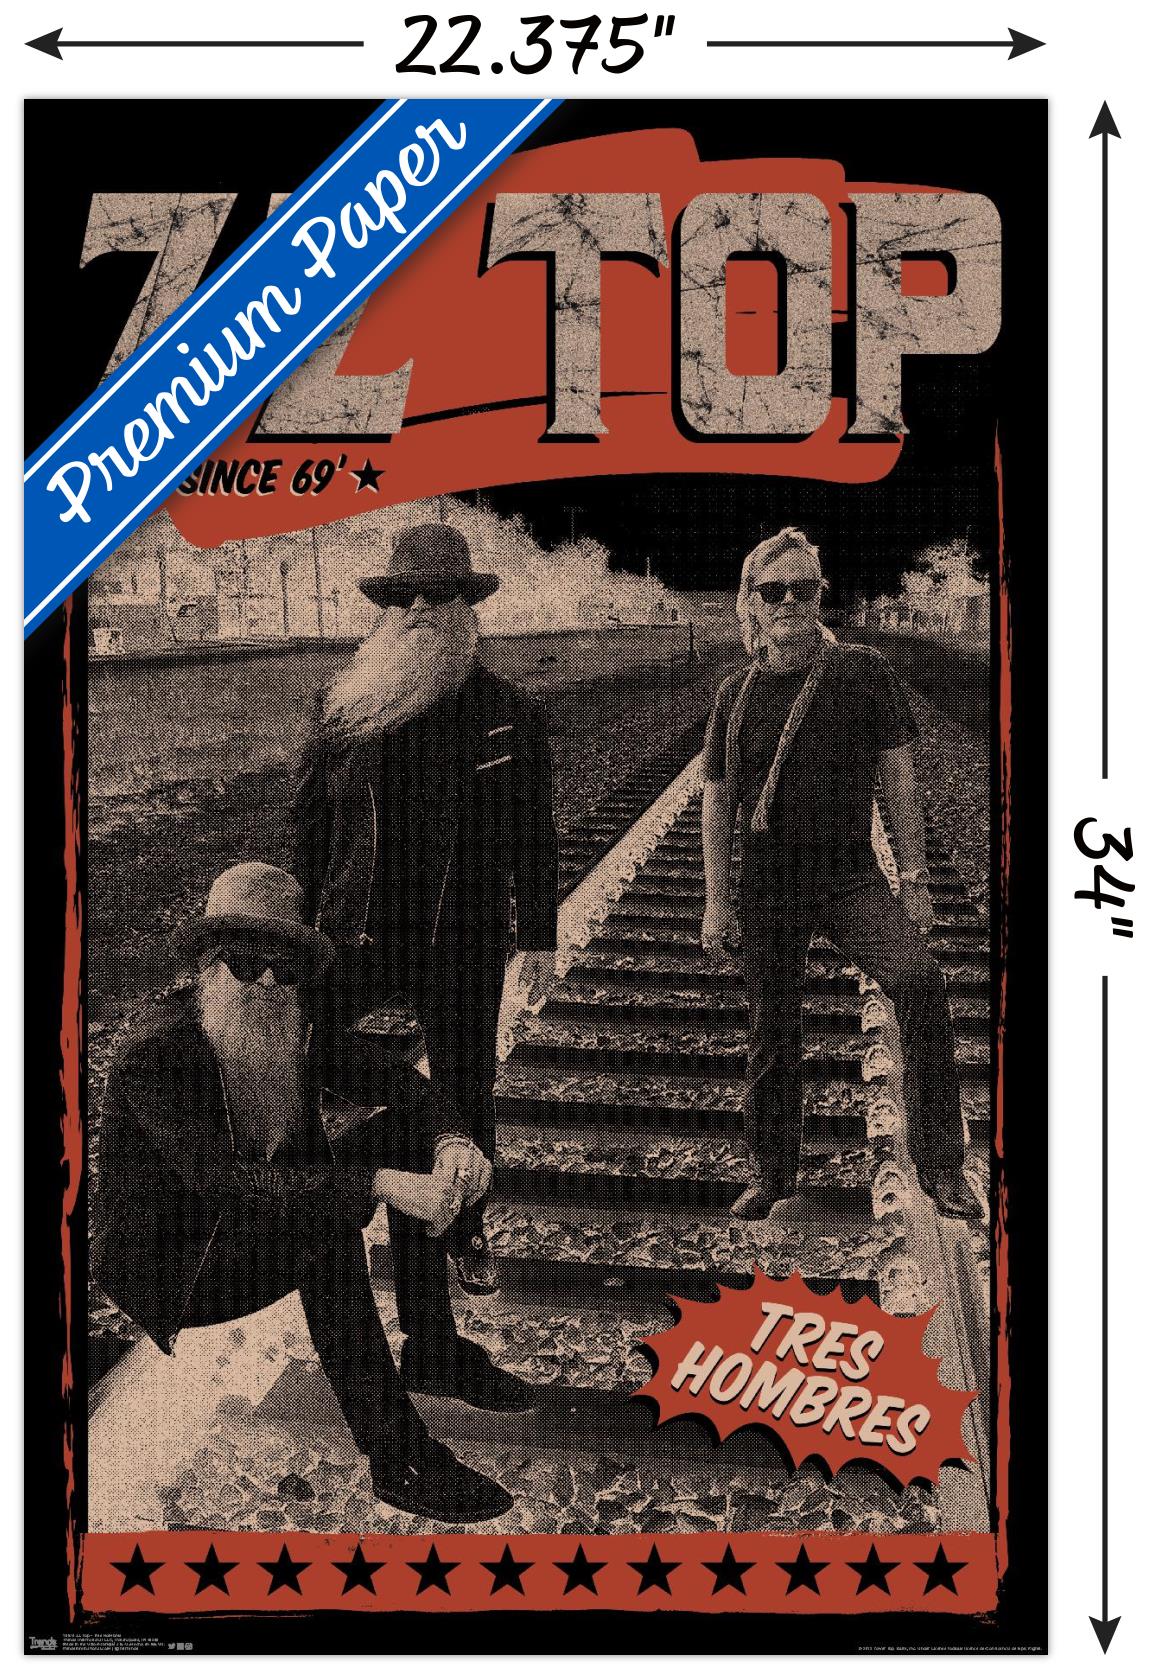 ZZ Top - Tres Hombres Wall Poster, 22.375" x 34" - image 3 of 5